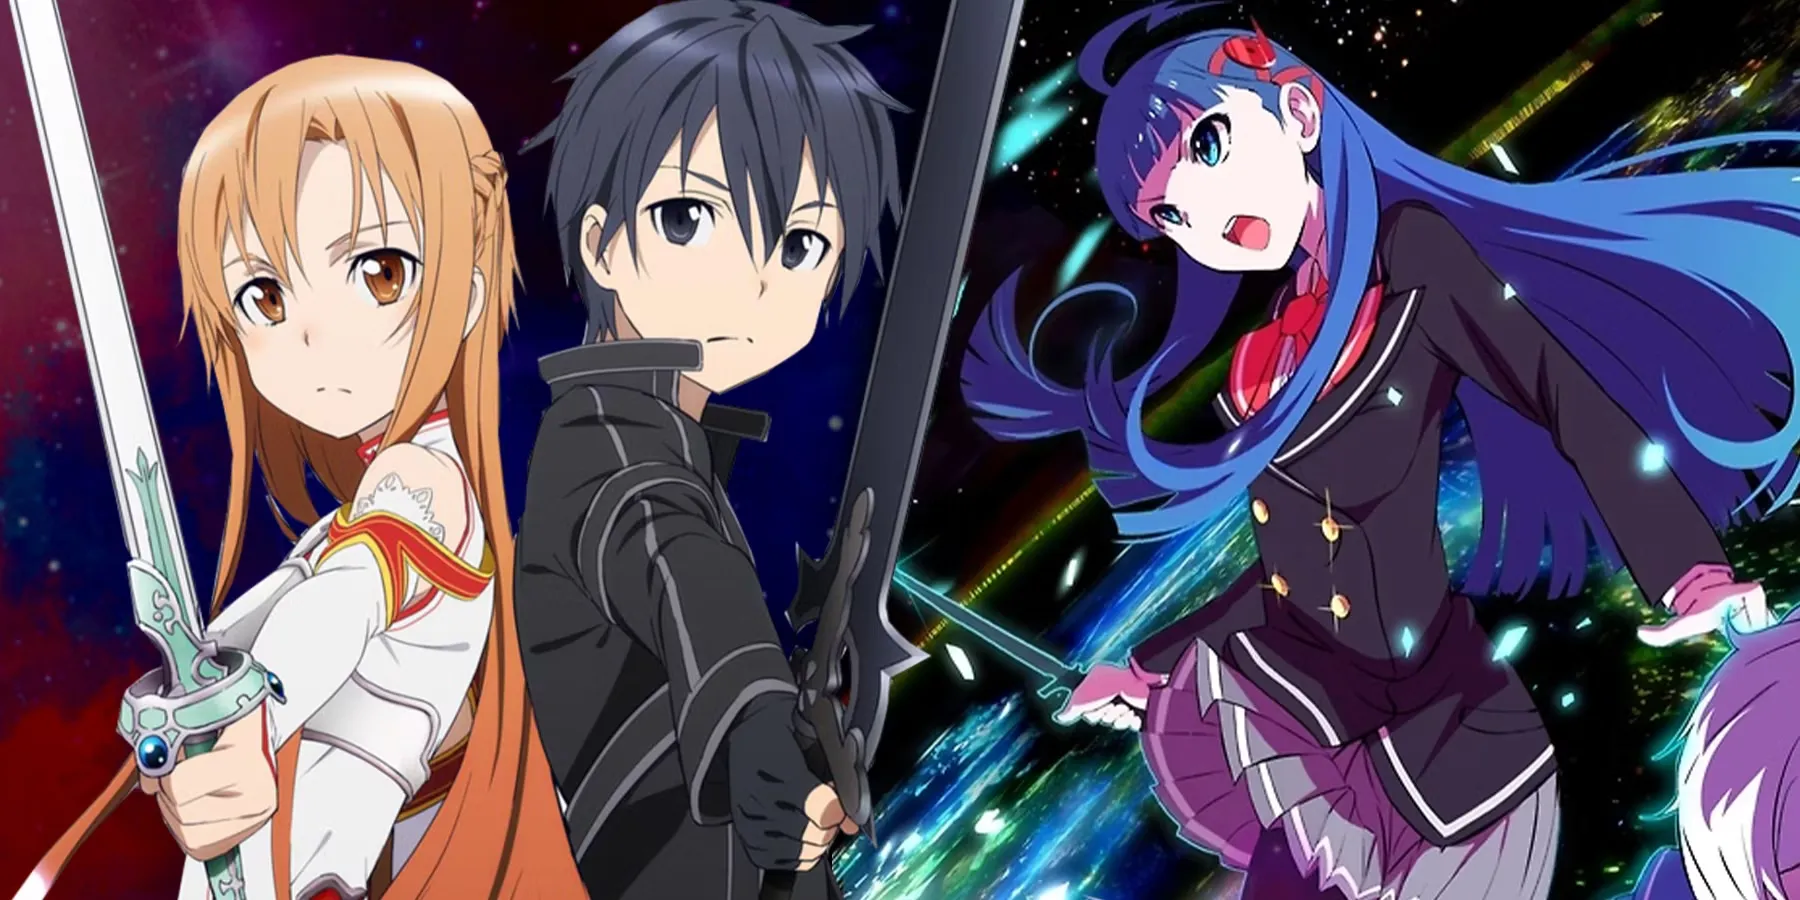 Sword Art Online’s Creator Has a Far Darker and More Underrated Sci-Fi Series